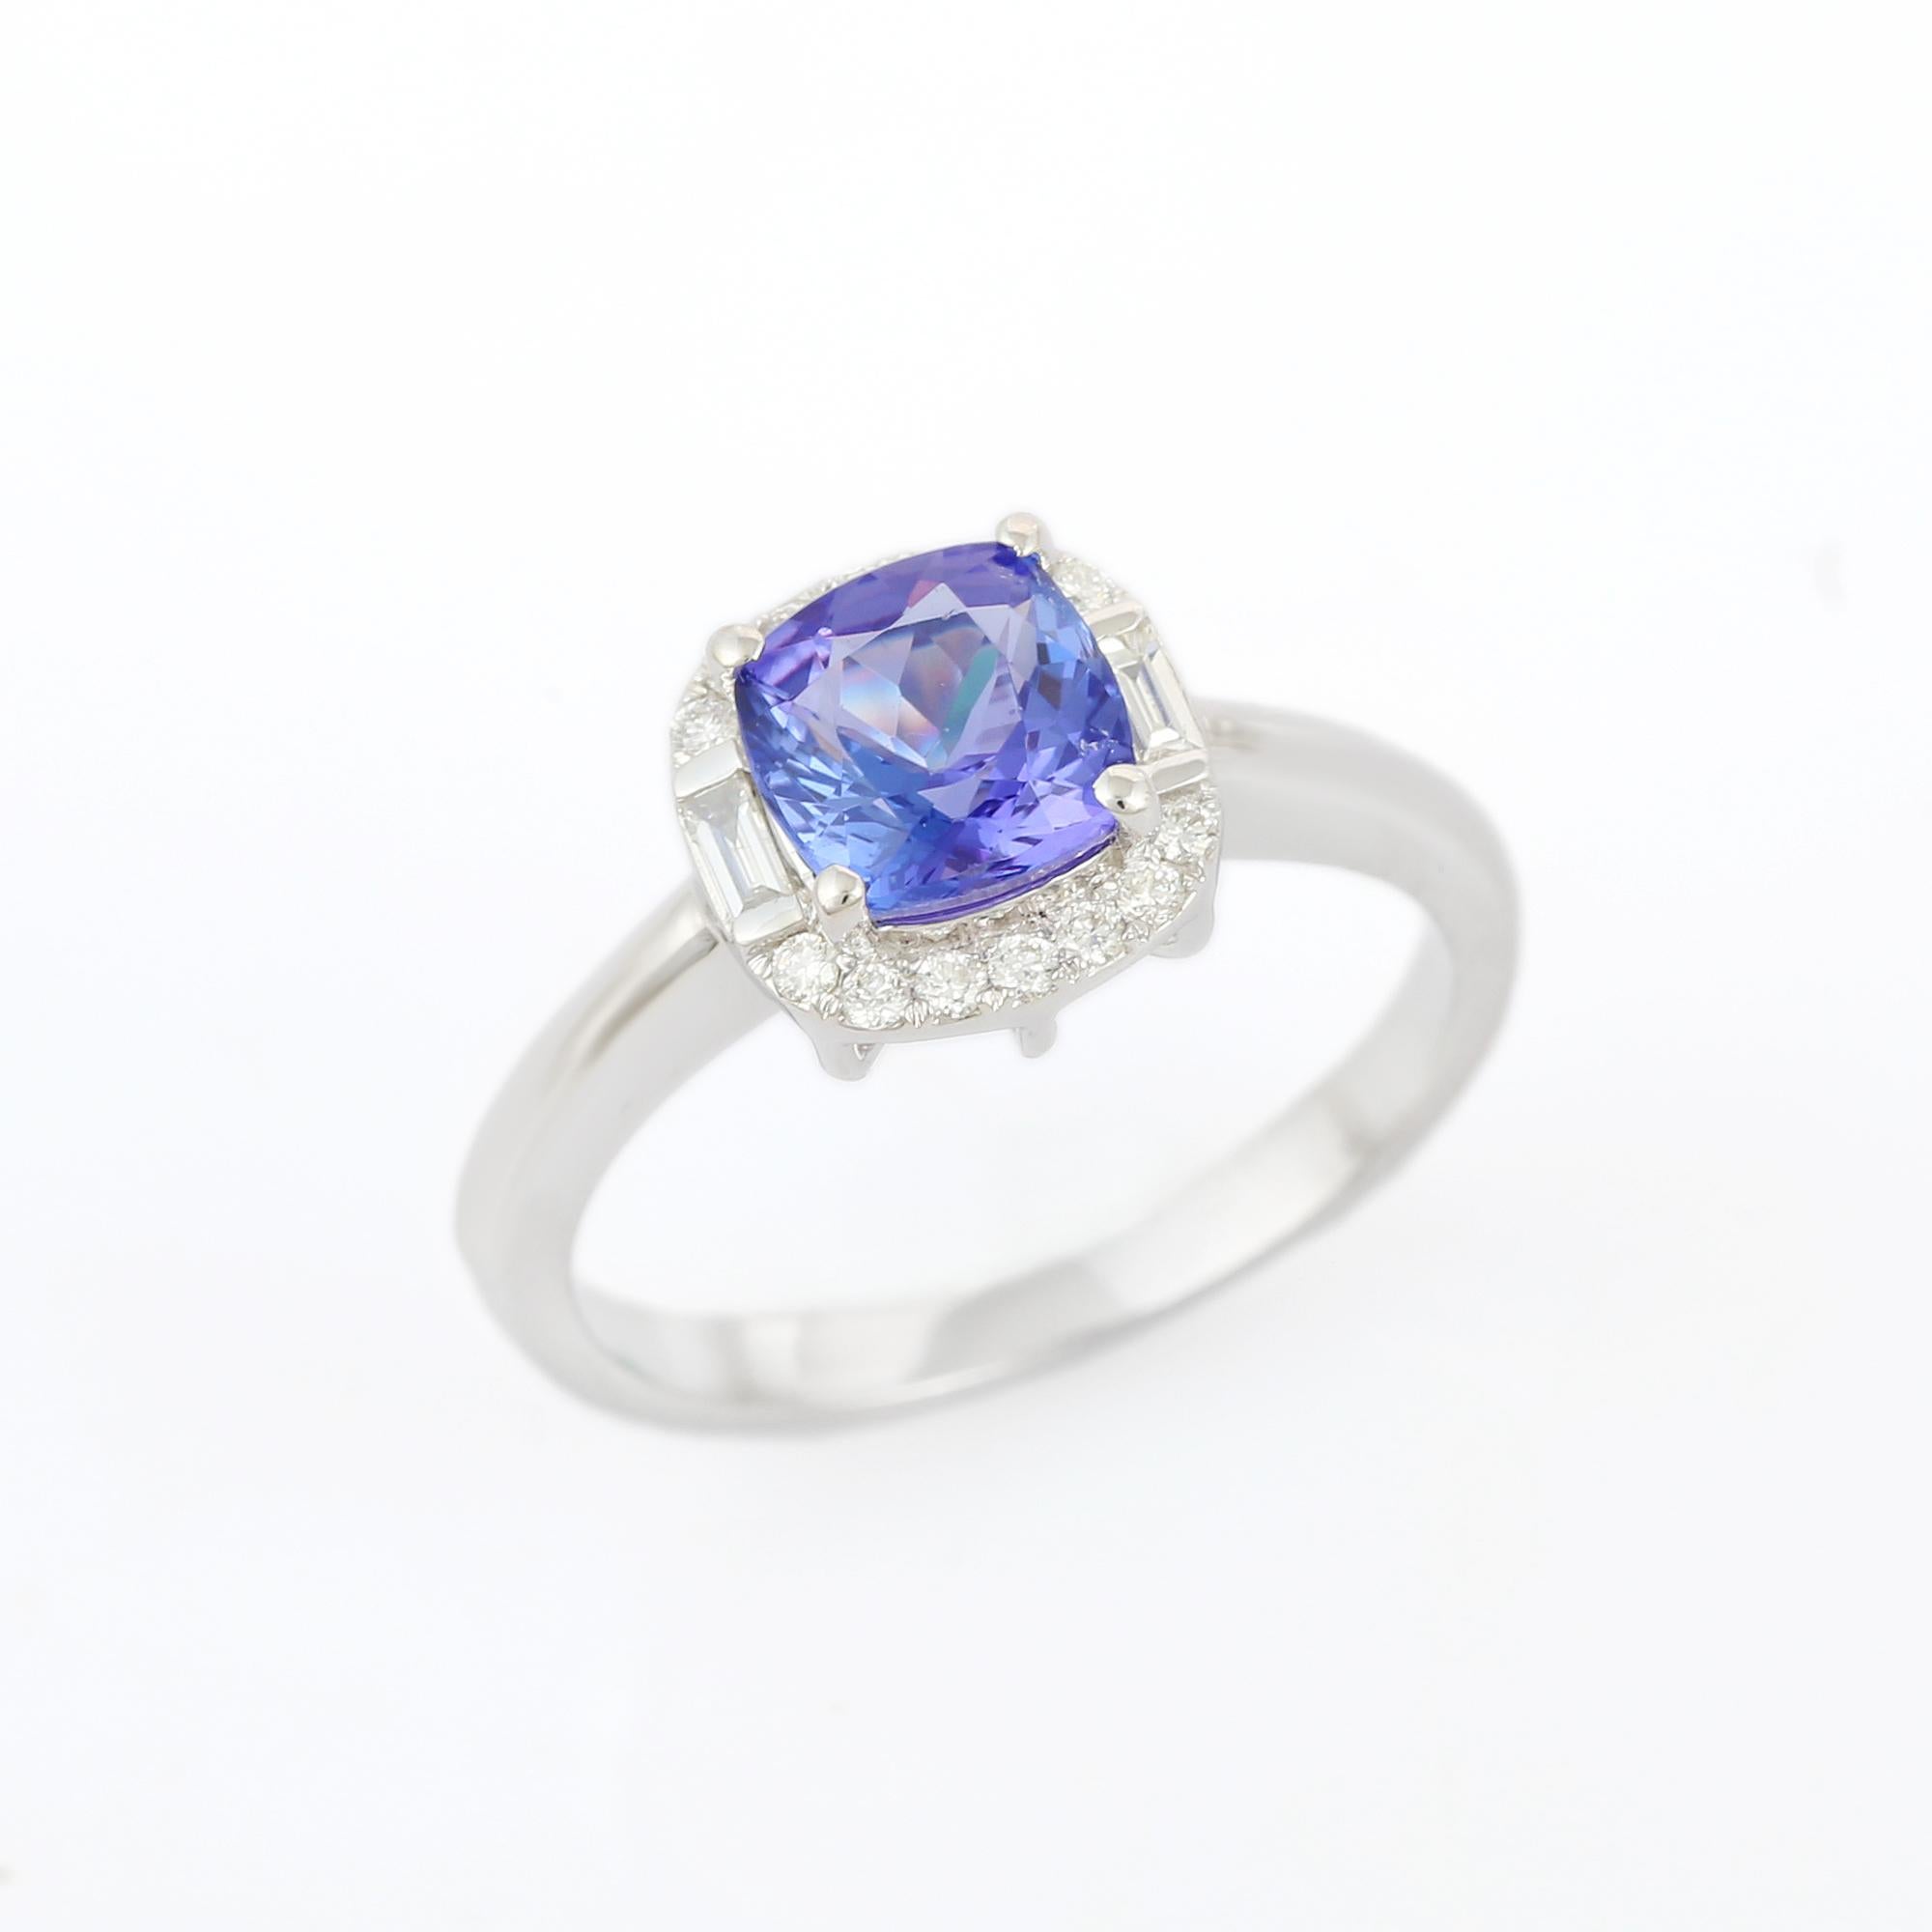 For Sale:  18k Solid White Gold Cushion Cut Tanzanite and Diamond Ring 3